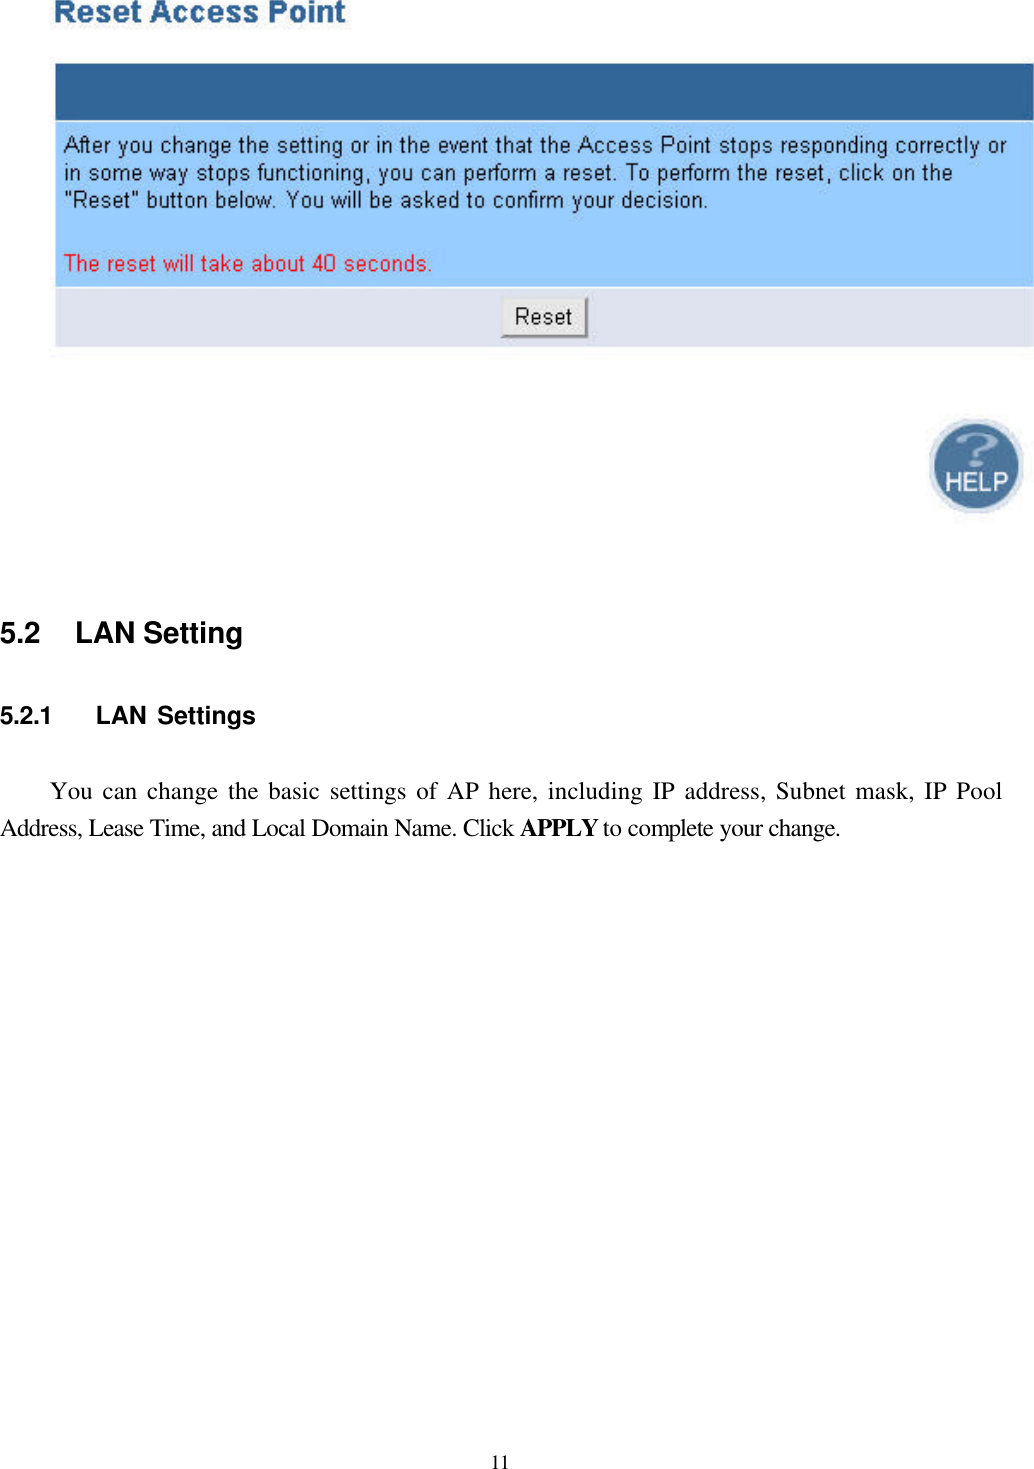  11    5.2 LAN Setting 5.2.1   LAN Settings You can change the basic settings of AP here, including IP address, Subnet mask, IP Pool Address, Lease Time, and Local Domain Name. Click APPLY to complete your change.    